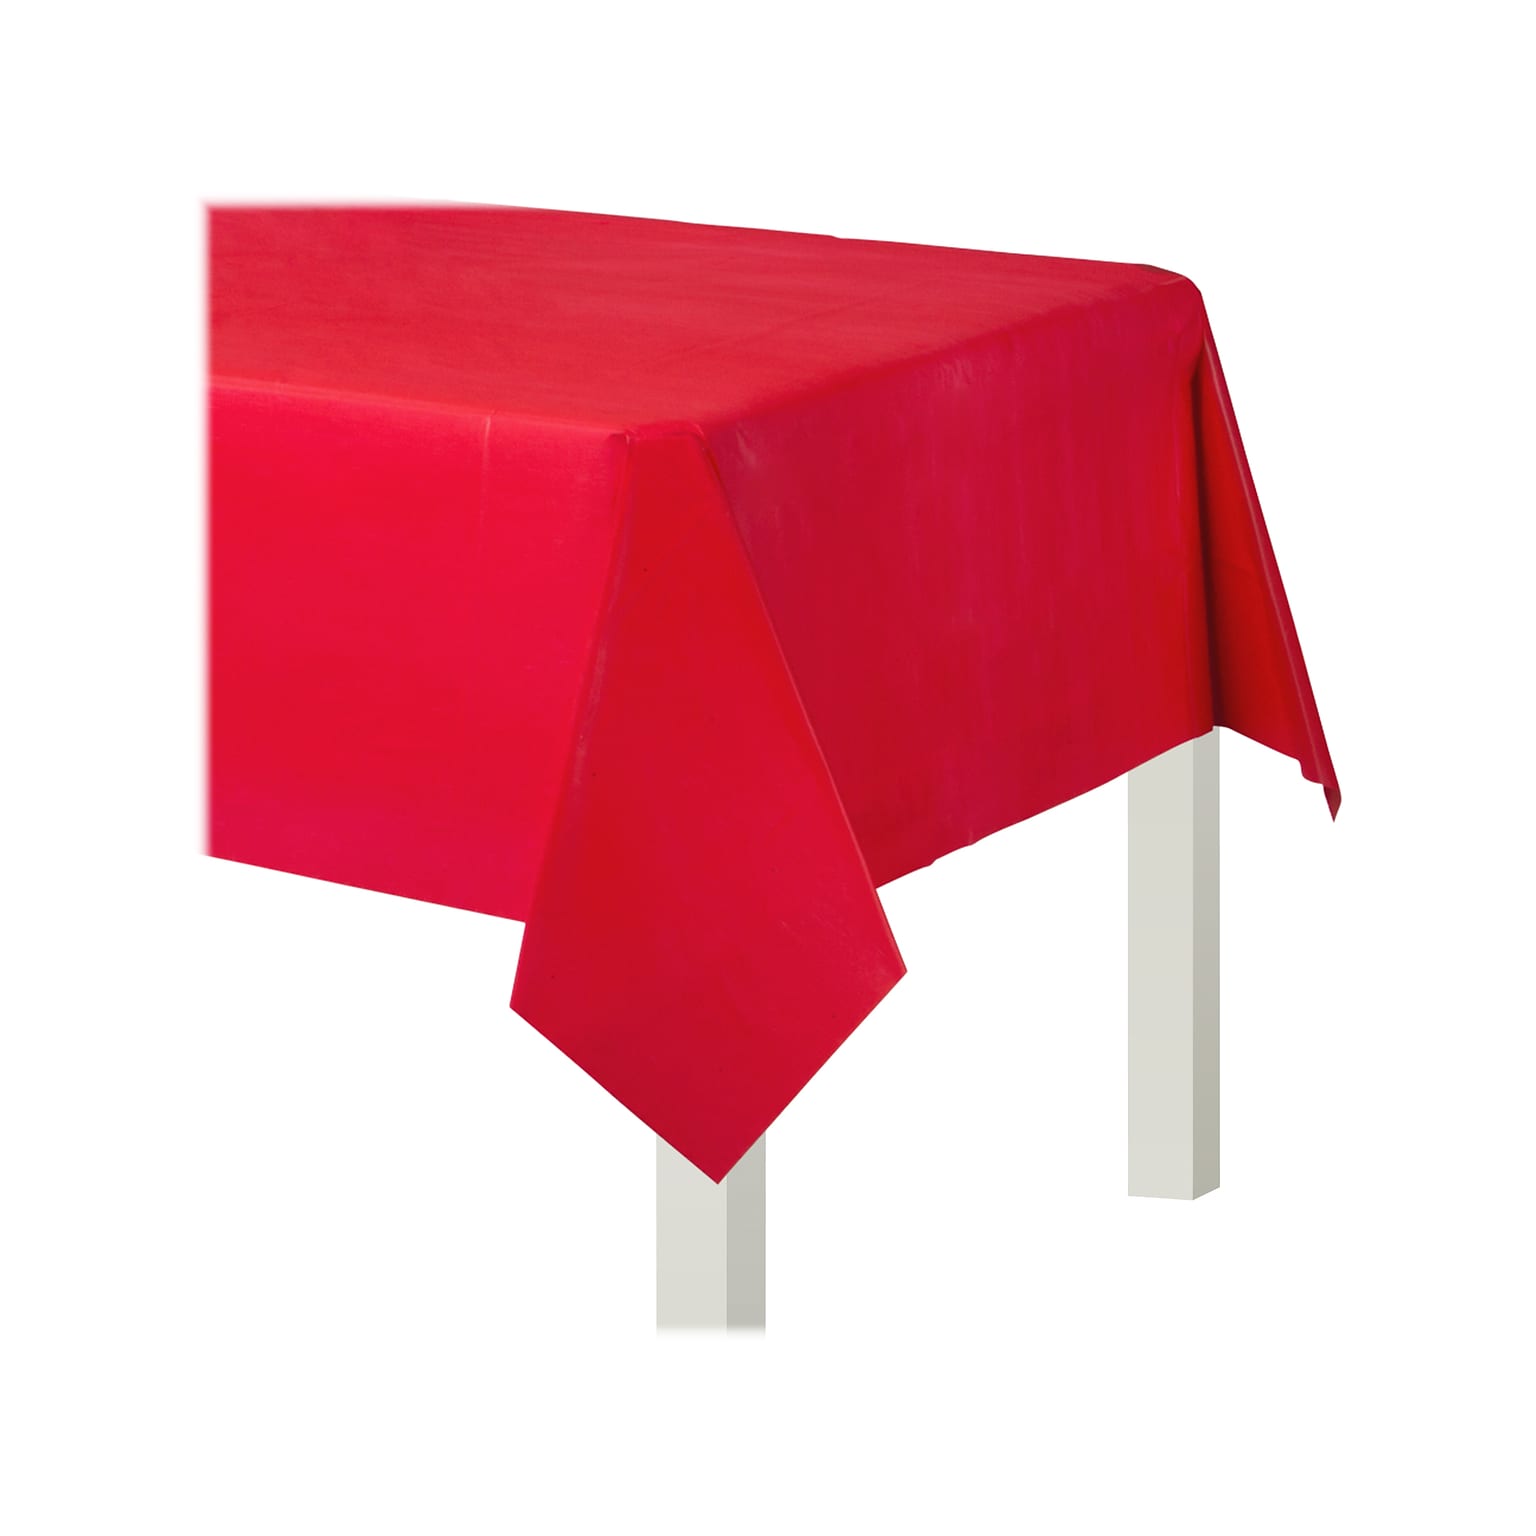 Amscan Party Table Cover, Apple Red, 2/Pack (579592.40)